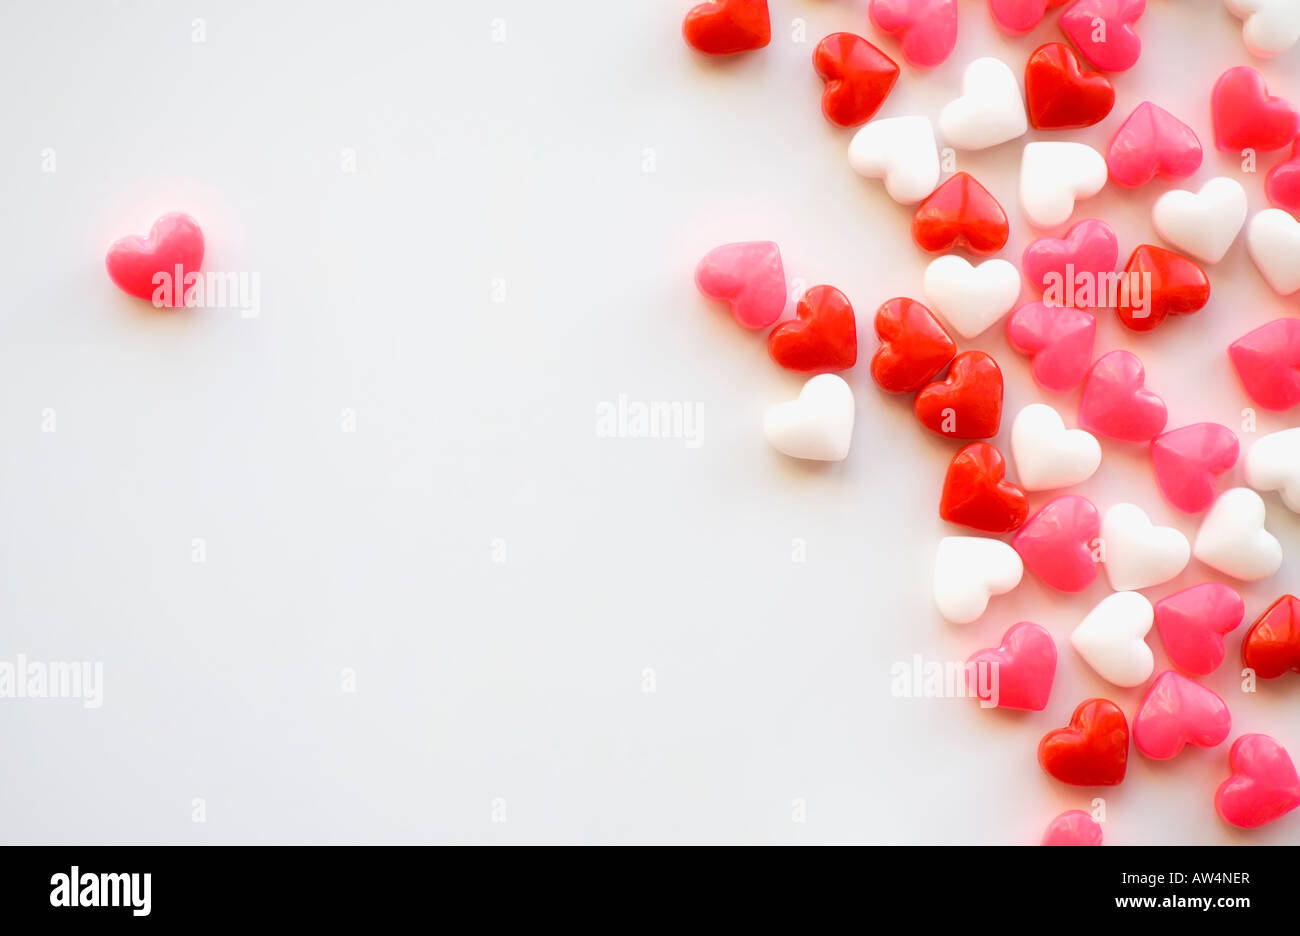 One candy heart separated from the others Stock Photo